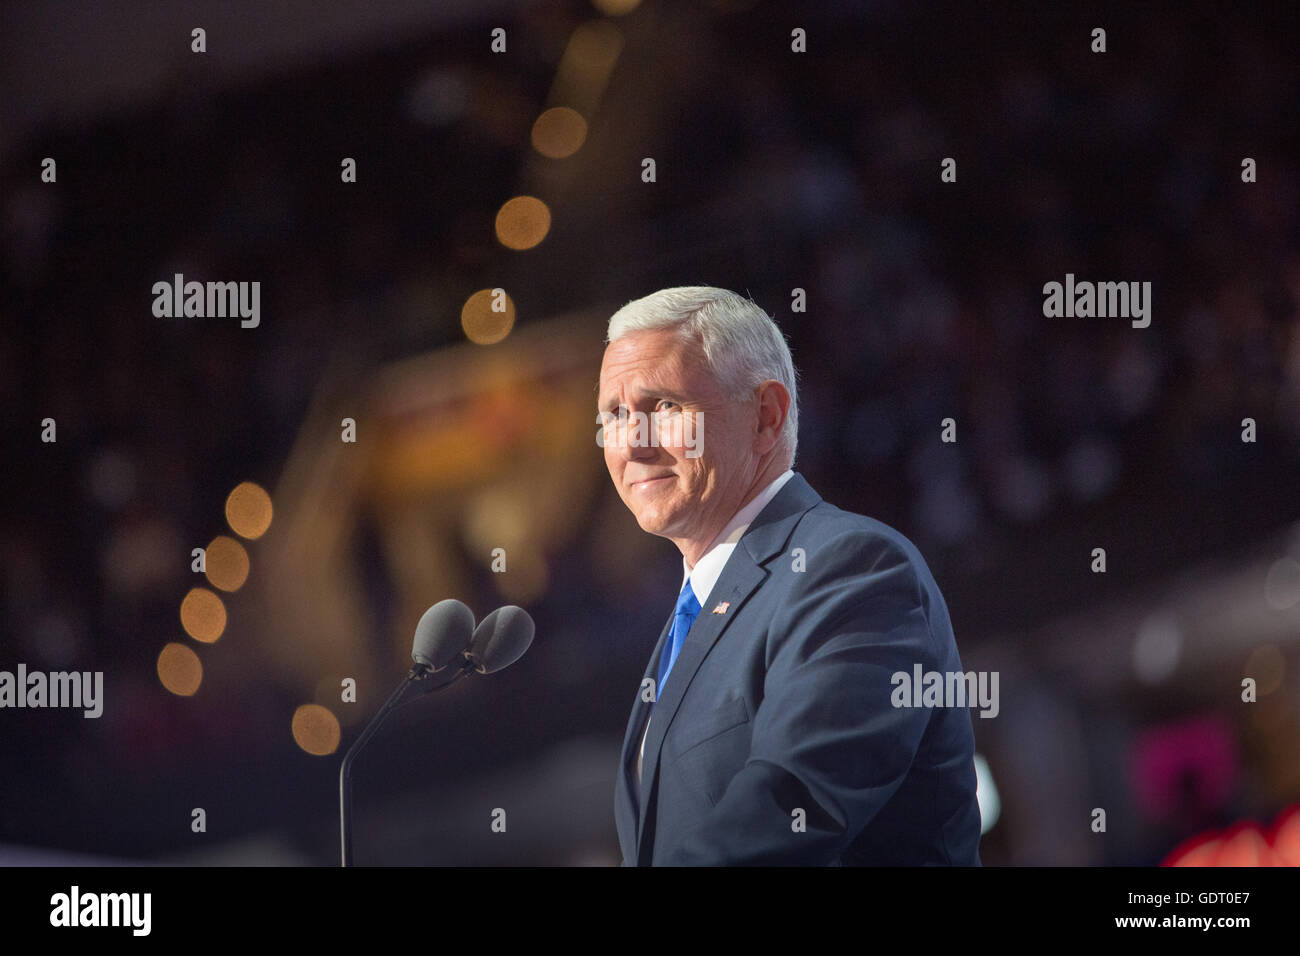 Cleveland, Ohio, USA; July 20, 2016: Vice presidential candidate Mike Pence speaks at the Republican National Convention. (Philip Scalia/Alamy Live News) Stock Photo